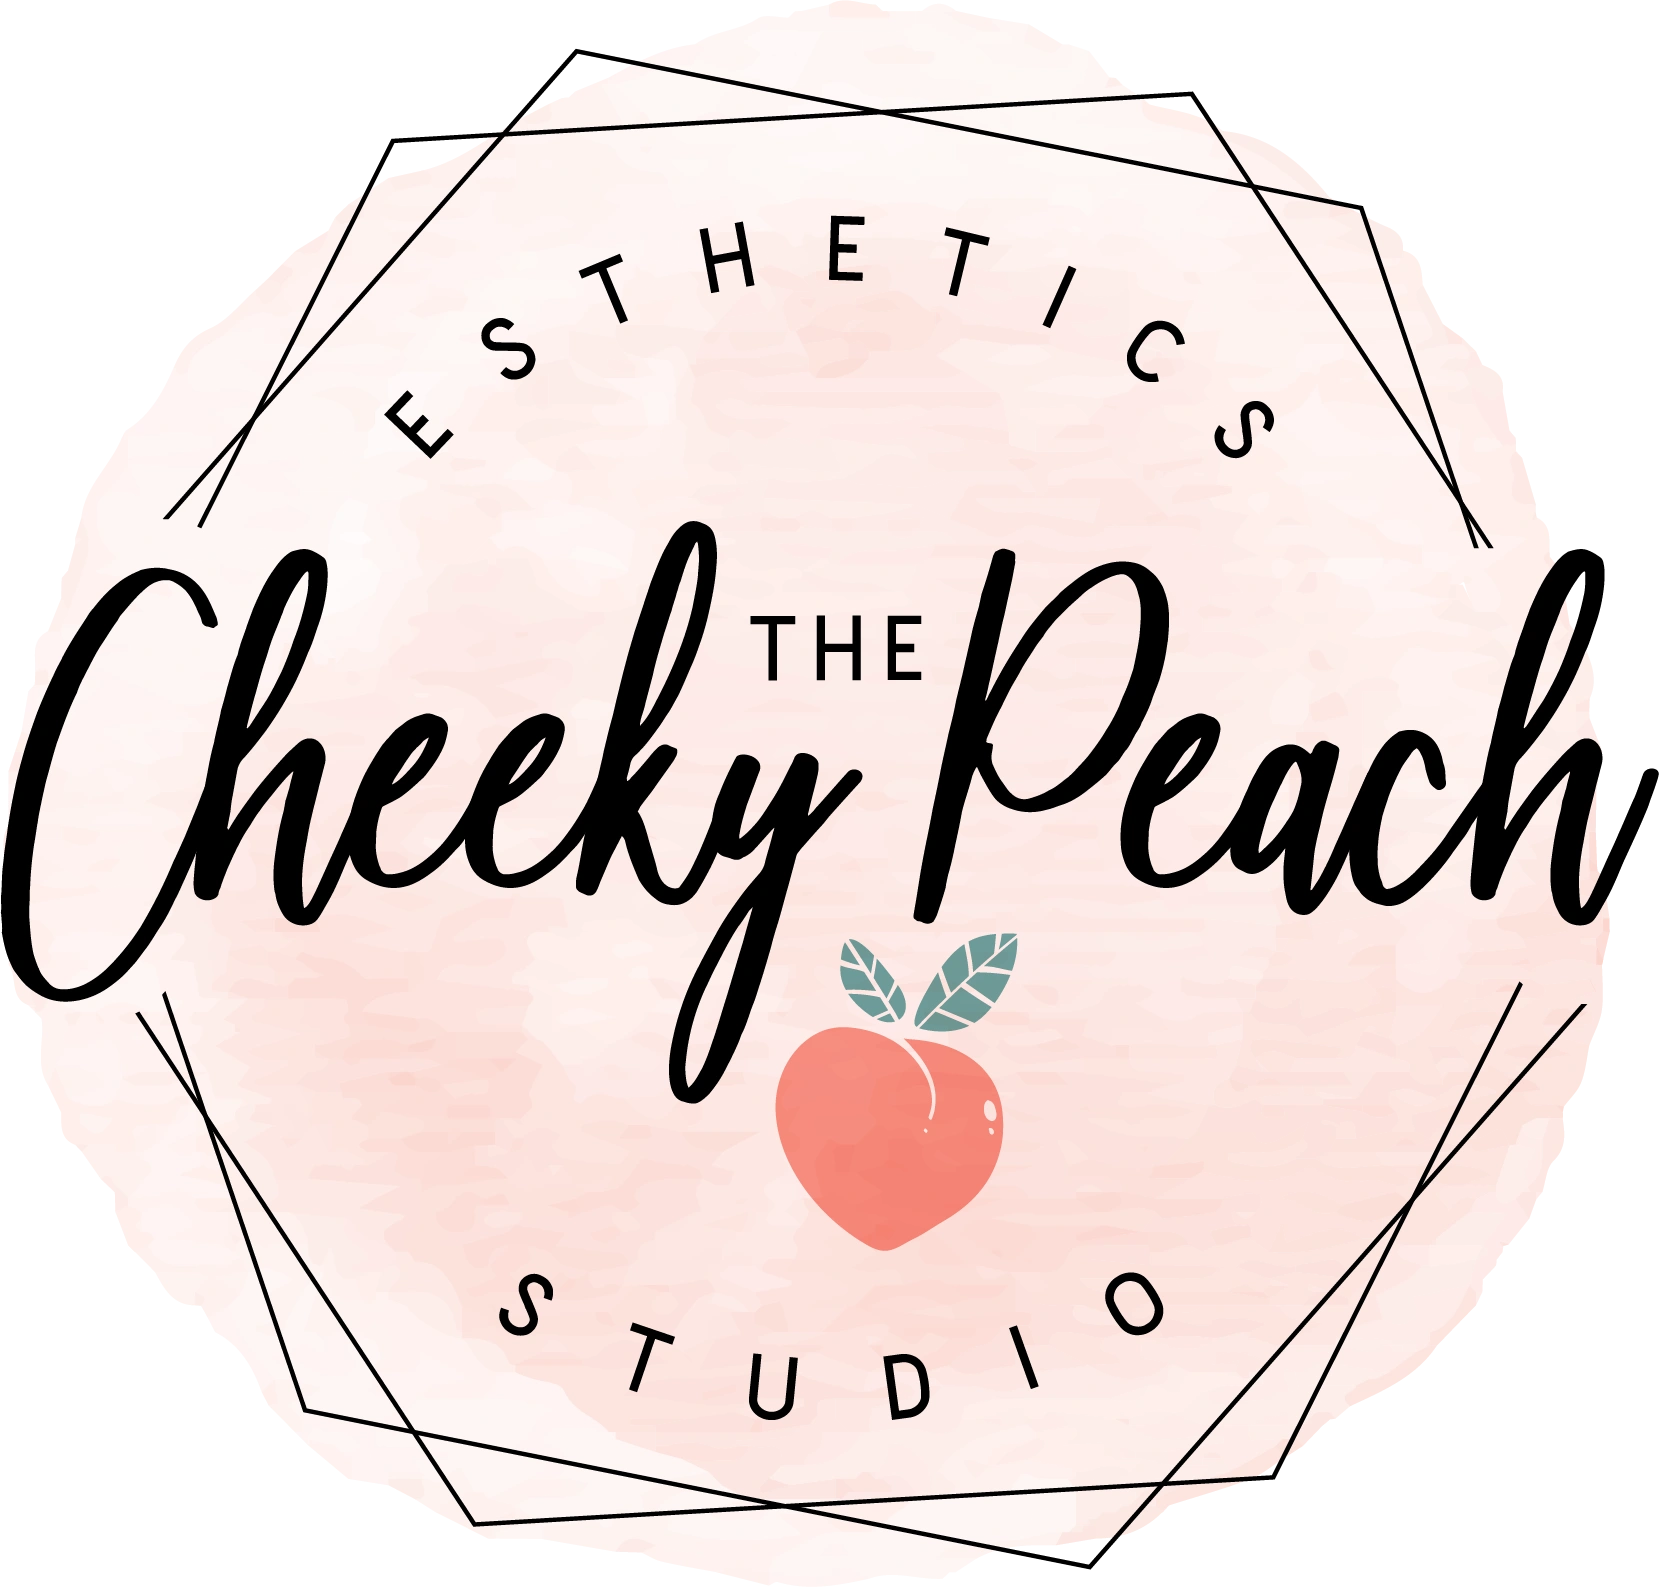 Peach the cheeky How To